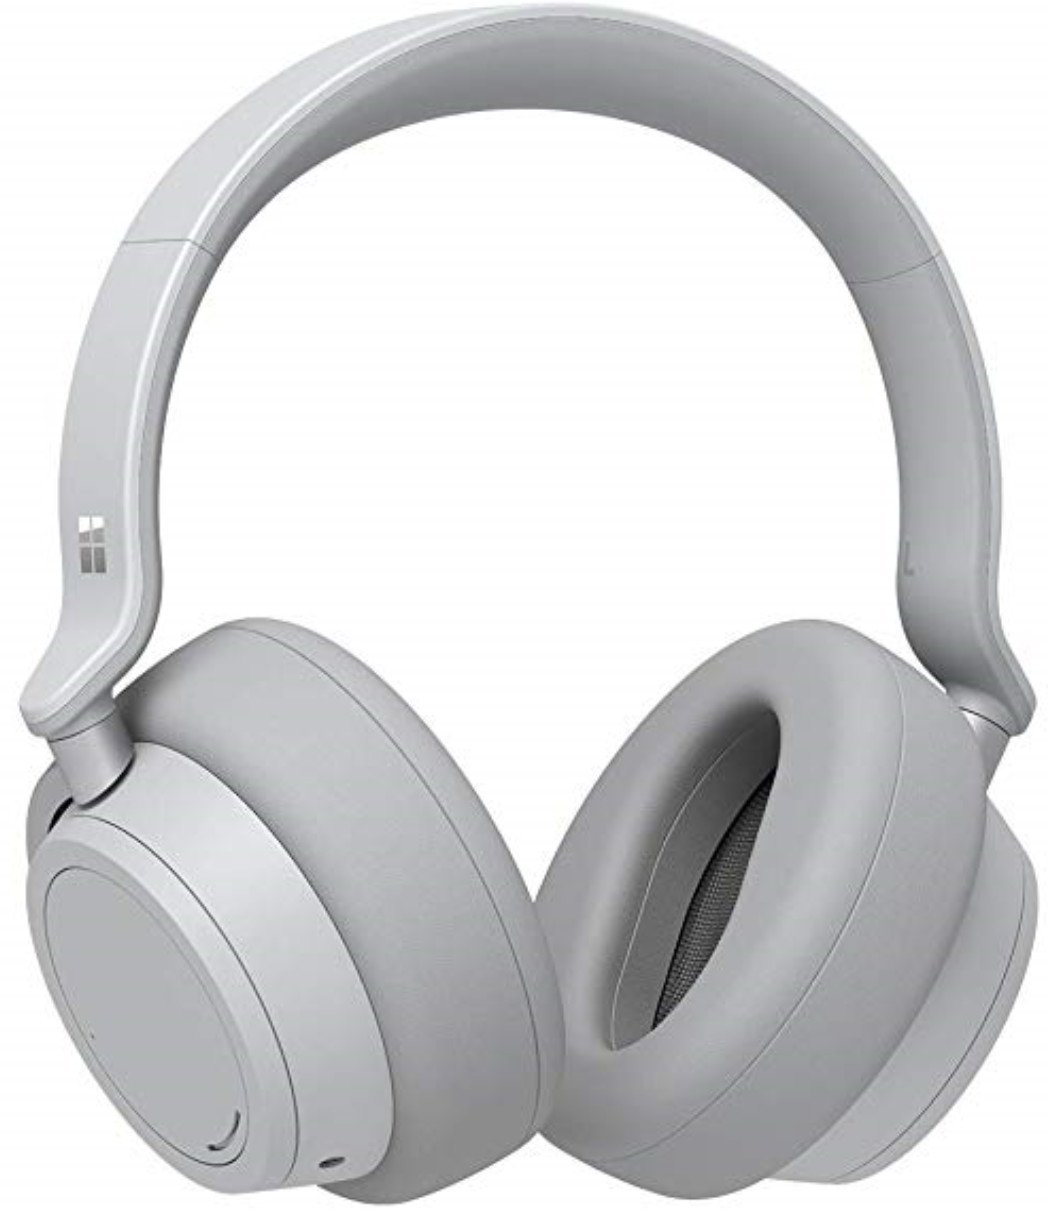 https://www.windowscentral.com/sites/wpcentral.com/files/field/image/2019/02/surface-headphones-reco.jpg